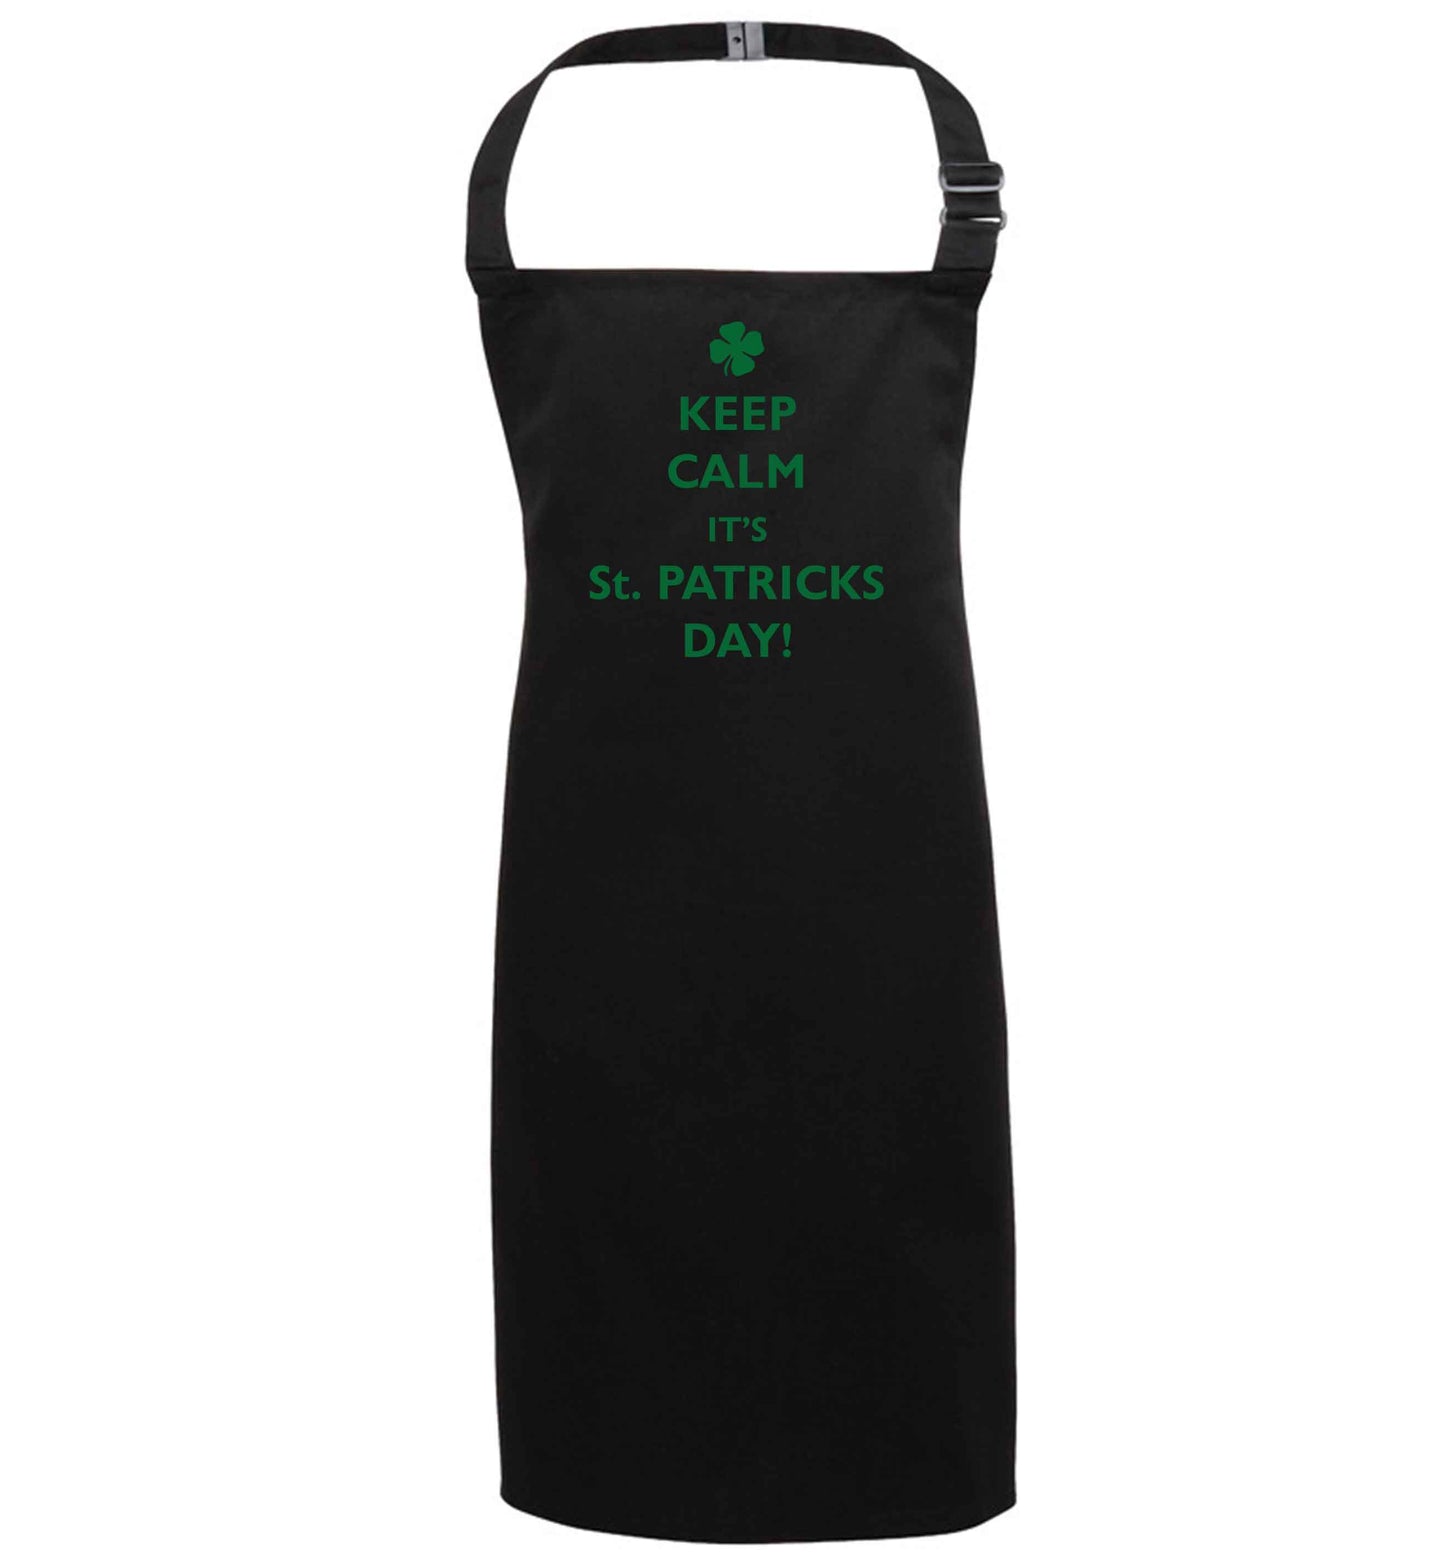 I can't keep calm it's St.Patricks day black apron 7-10 years